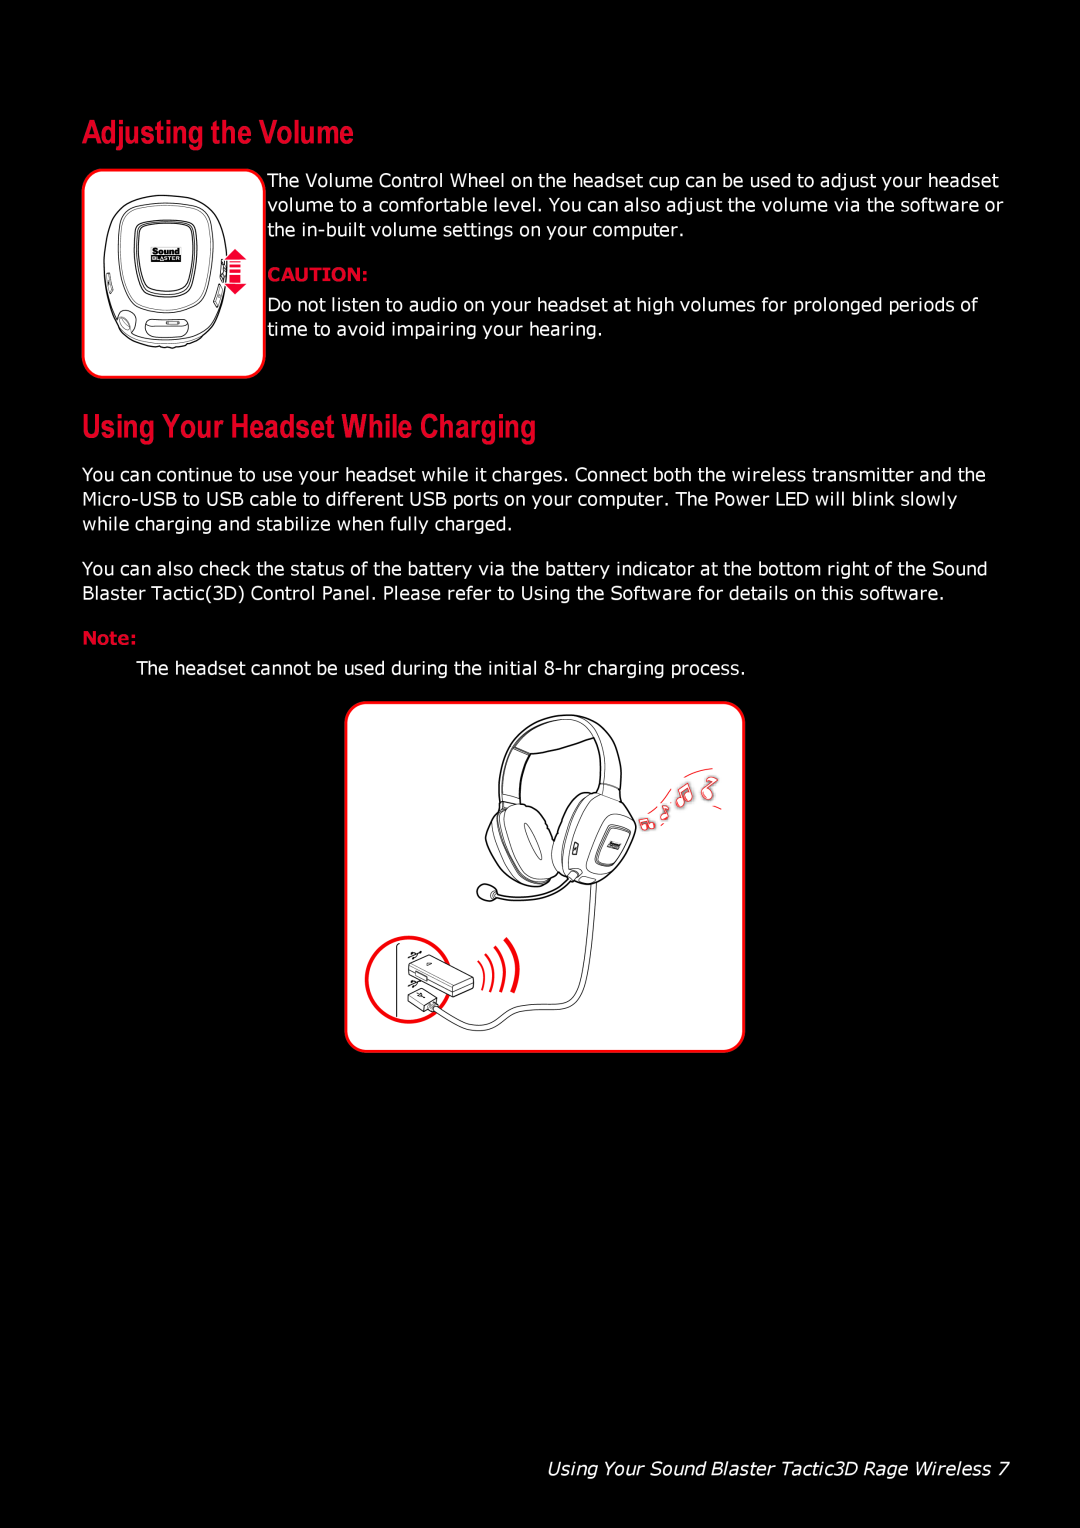 Creative GH0220A Adjusting the Volume, Using Your Headset While Charging, Using Your Sound Blaster Tactic3D Rage Wireless 